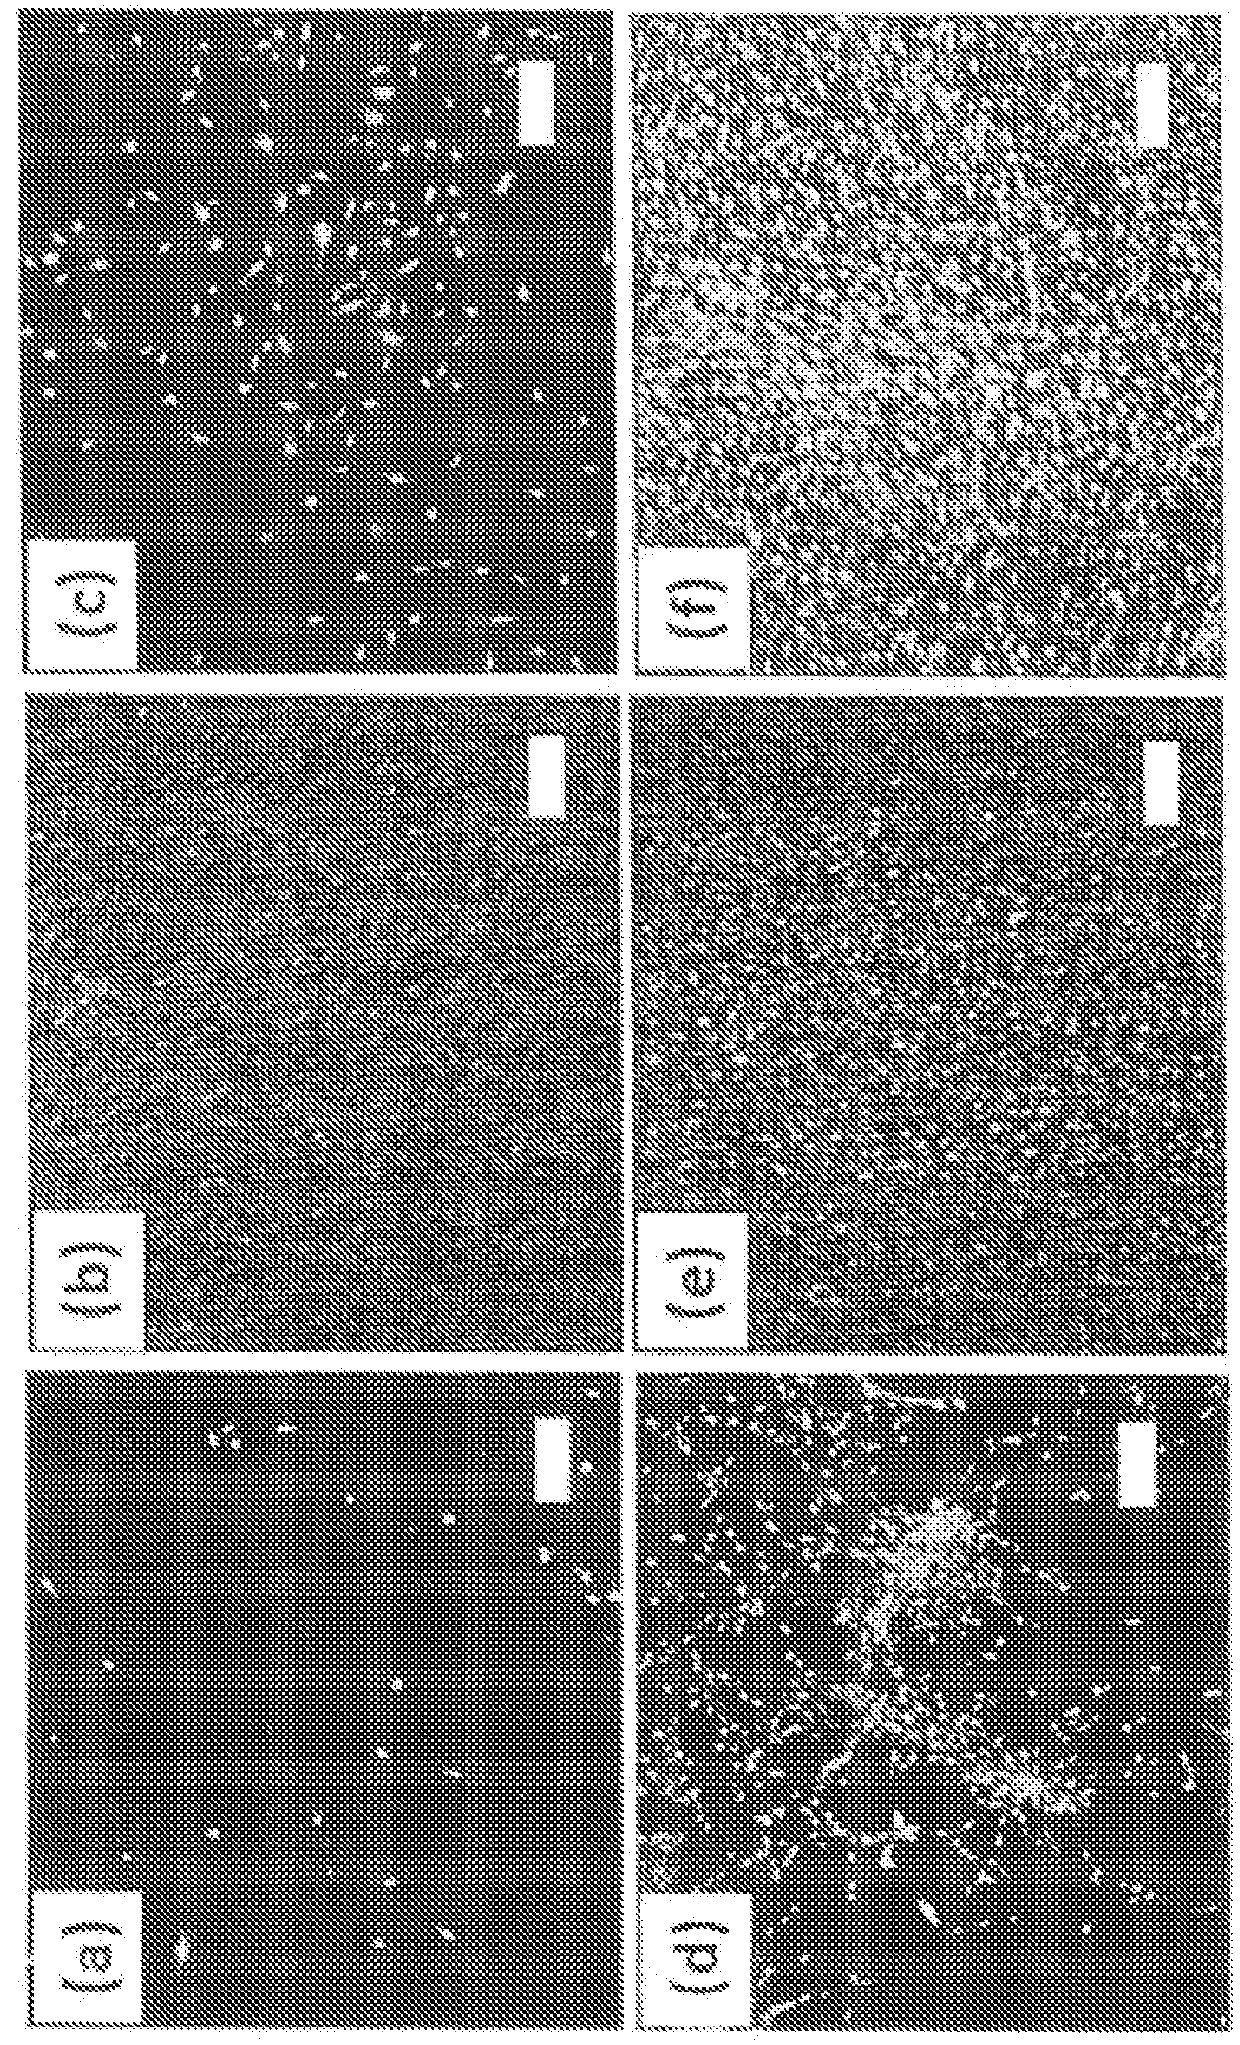 PEM layer-by-layer systems for coating substrates to improve bioactivity and biomolecule delivery